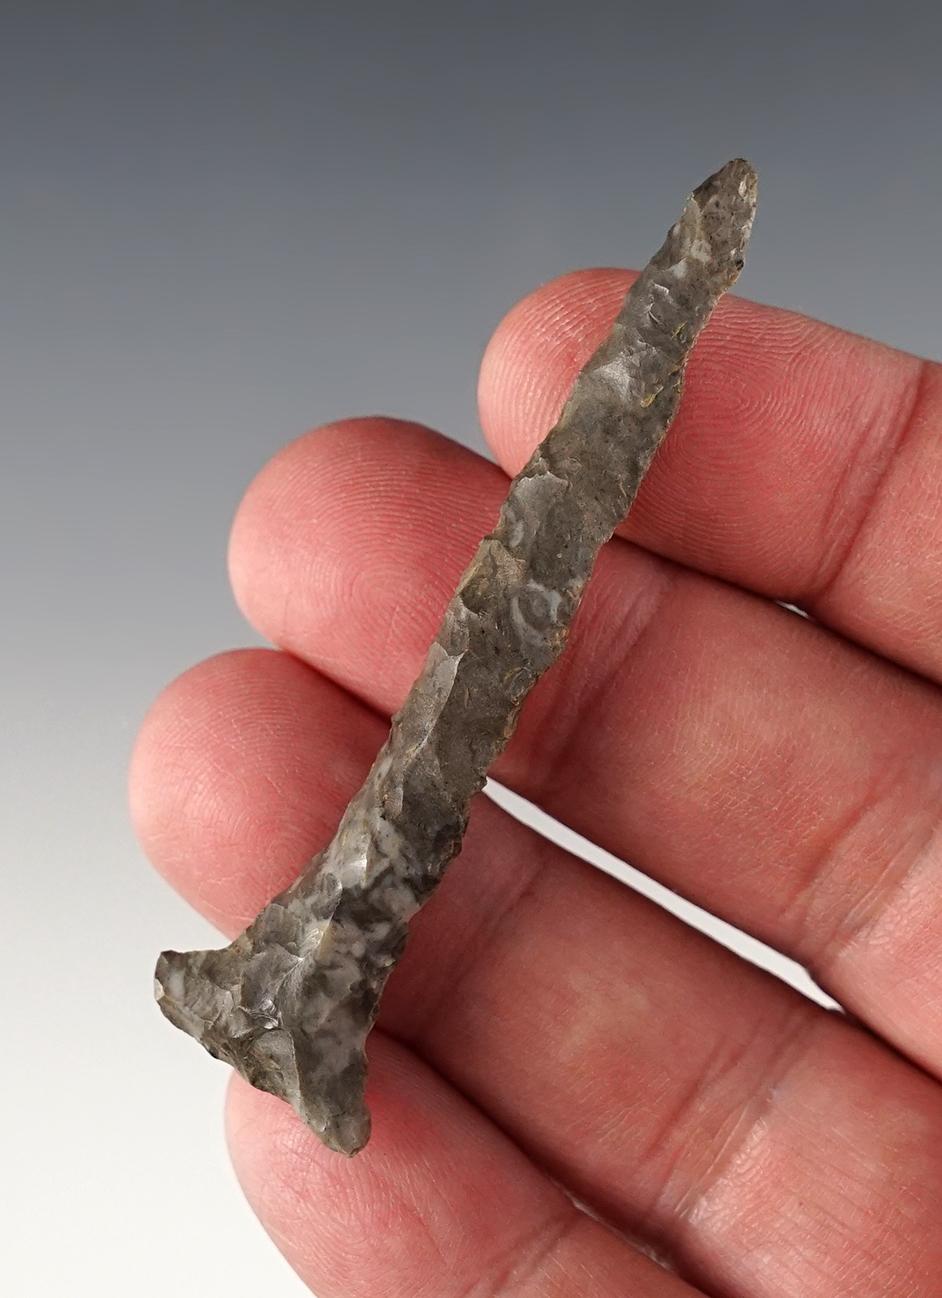 2 11/16" T-Drill made from Onondaga Flint. Found in the Pennsylvania/New York area.